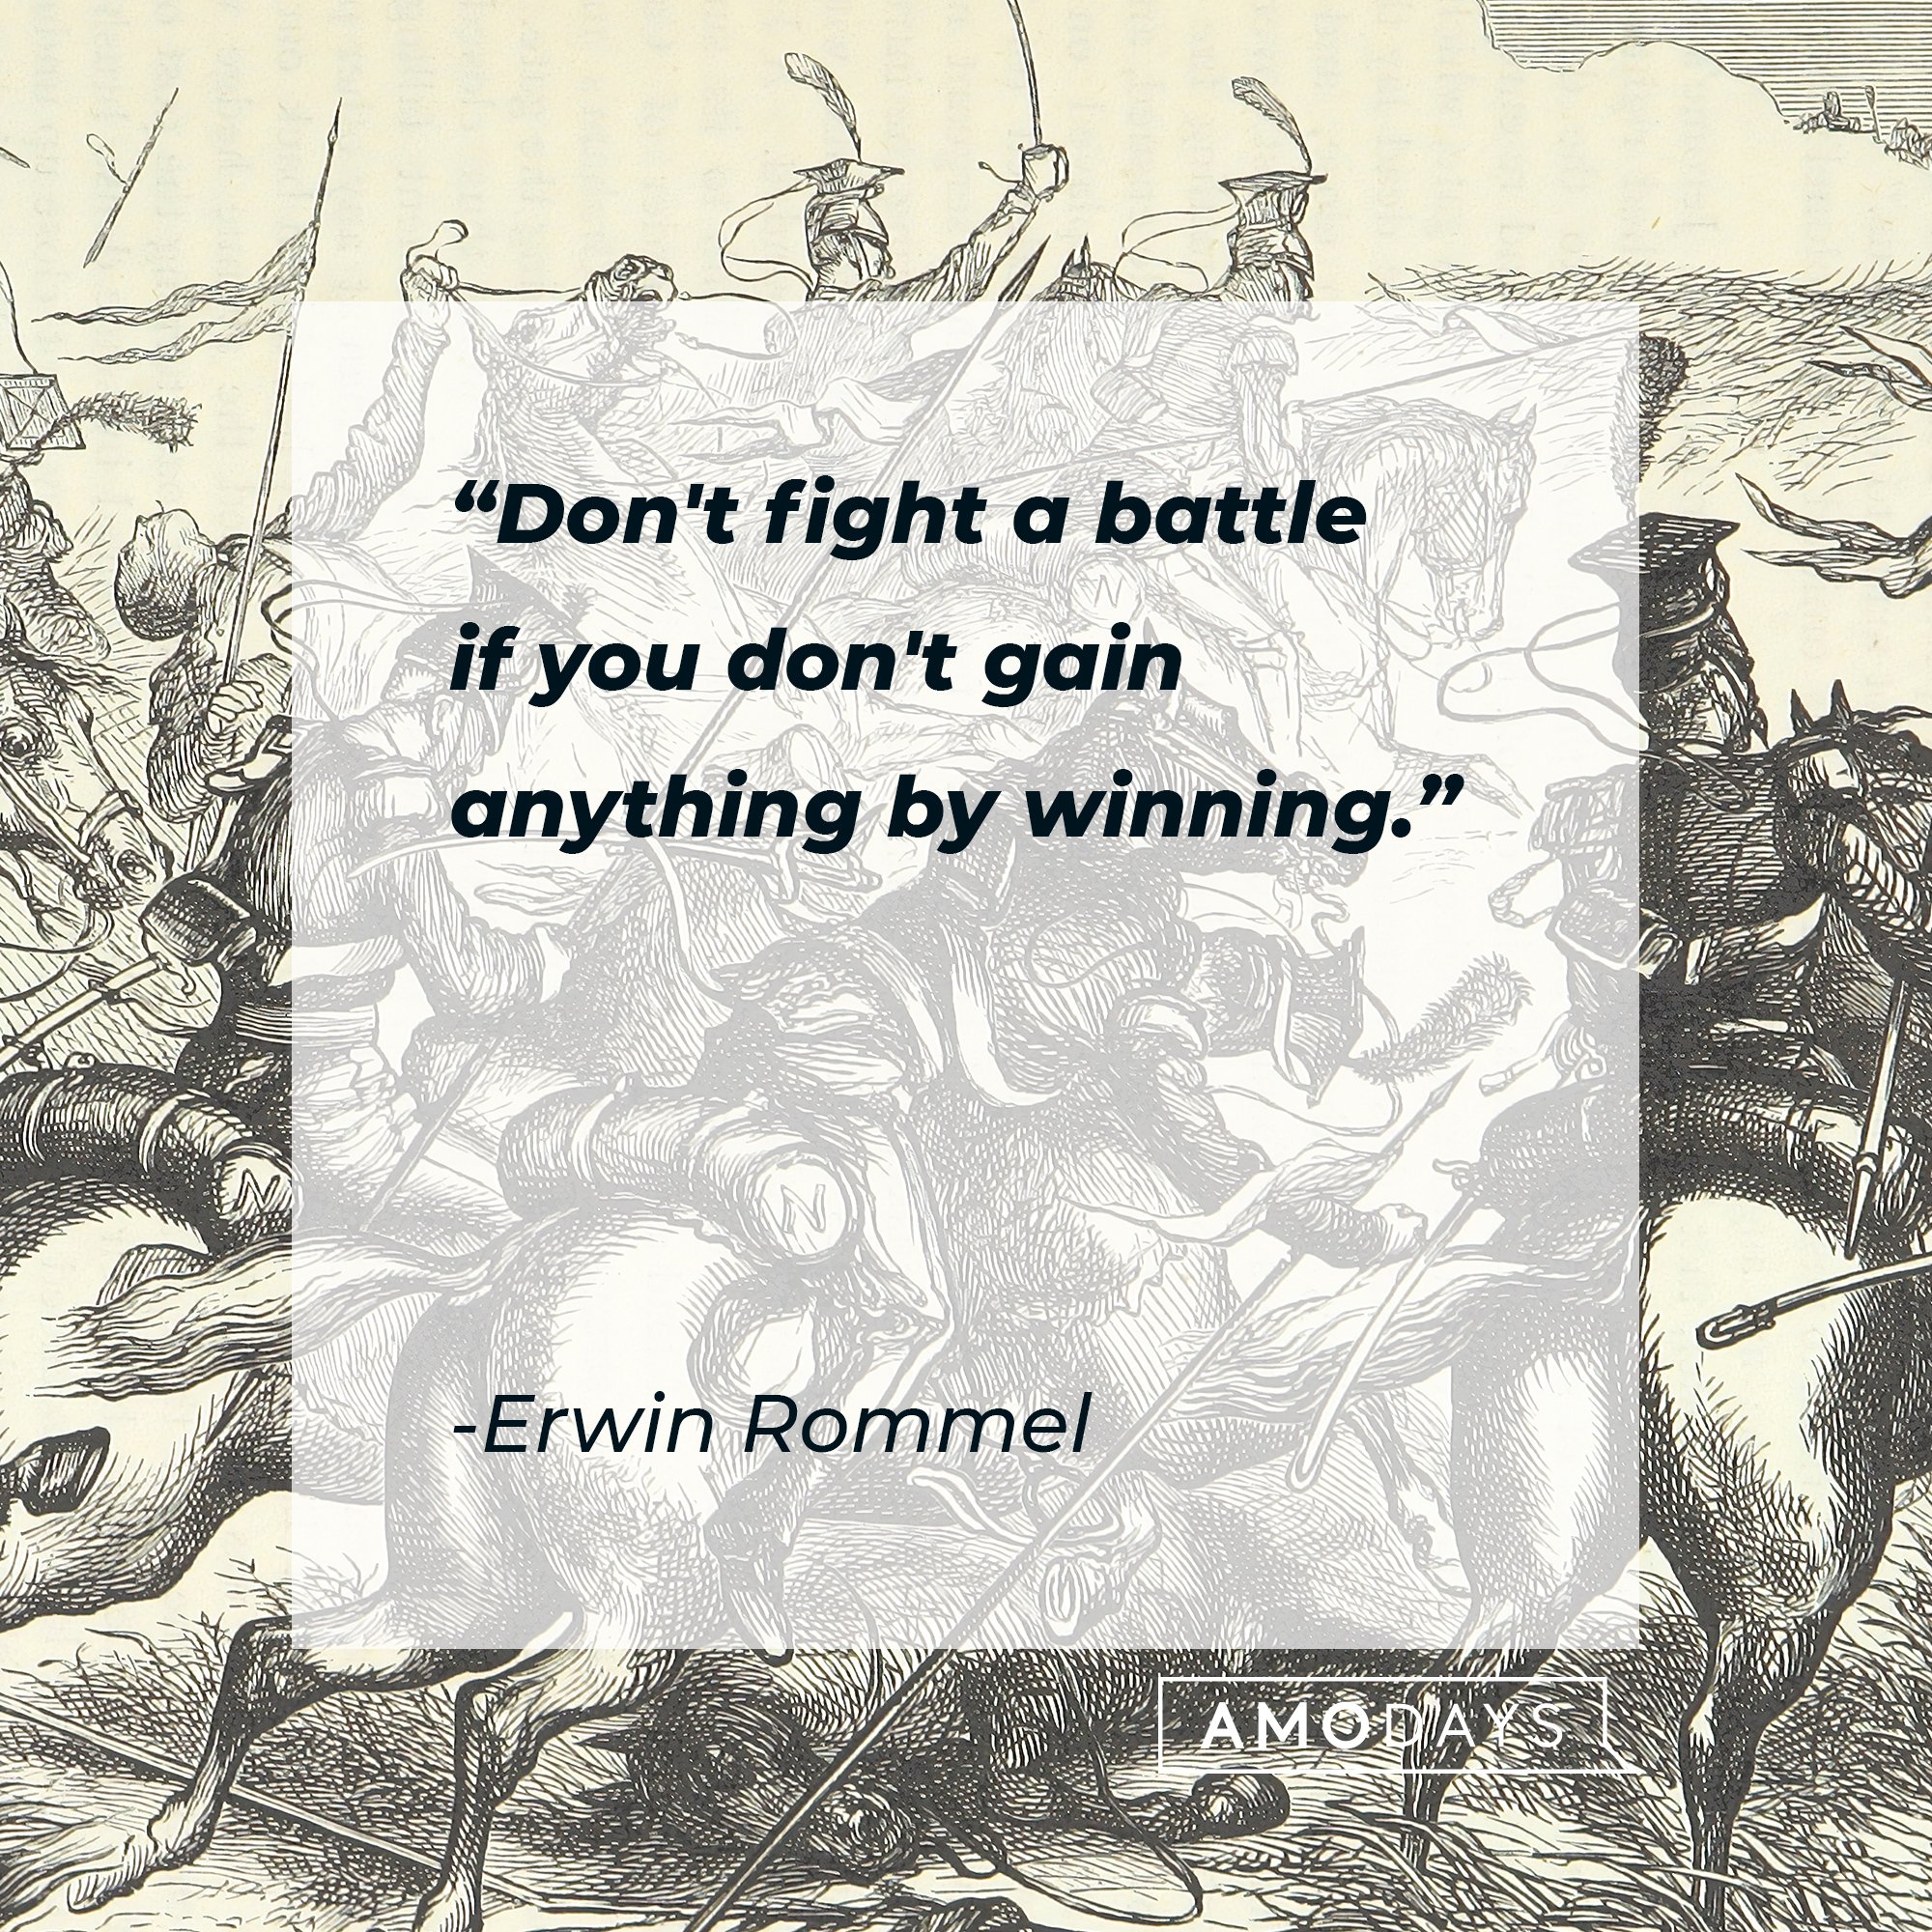 Erwin Rommel’s quote: "Don't fight a battle if you don't gain anything by winning." | Image: AmoDays